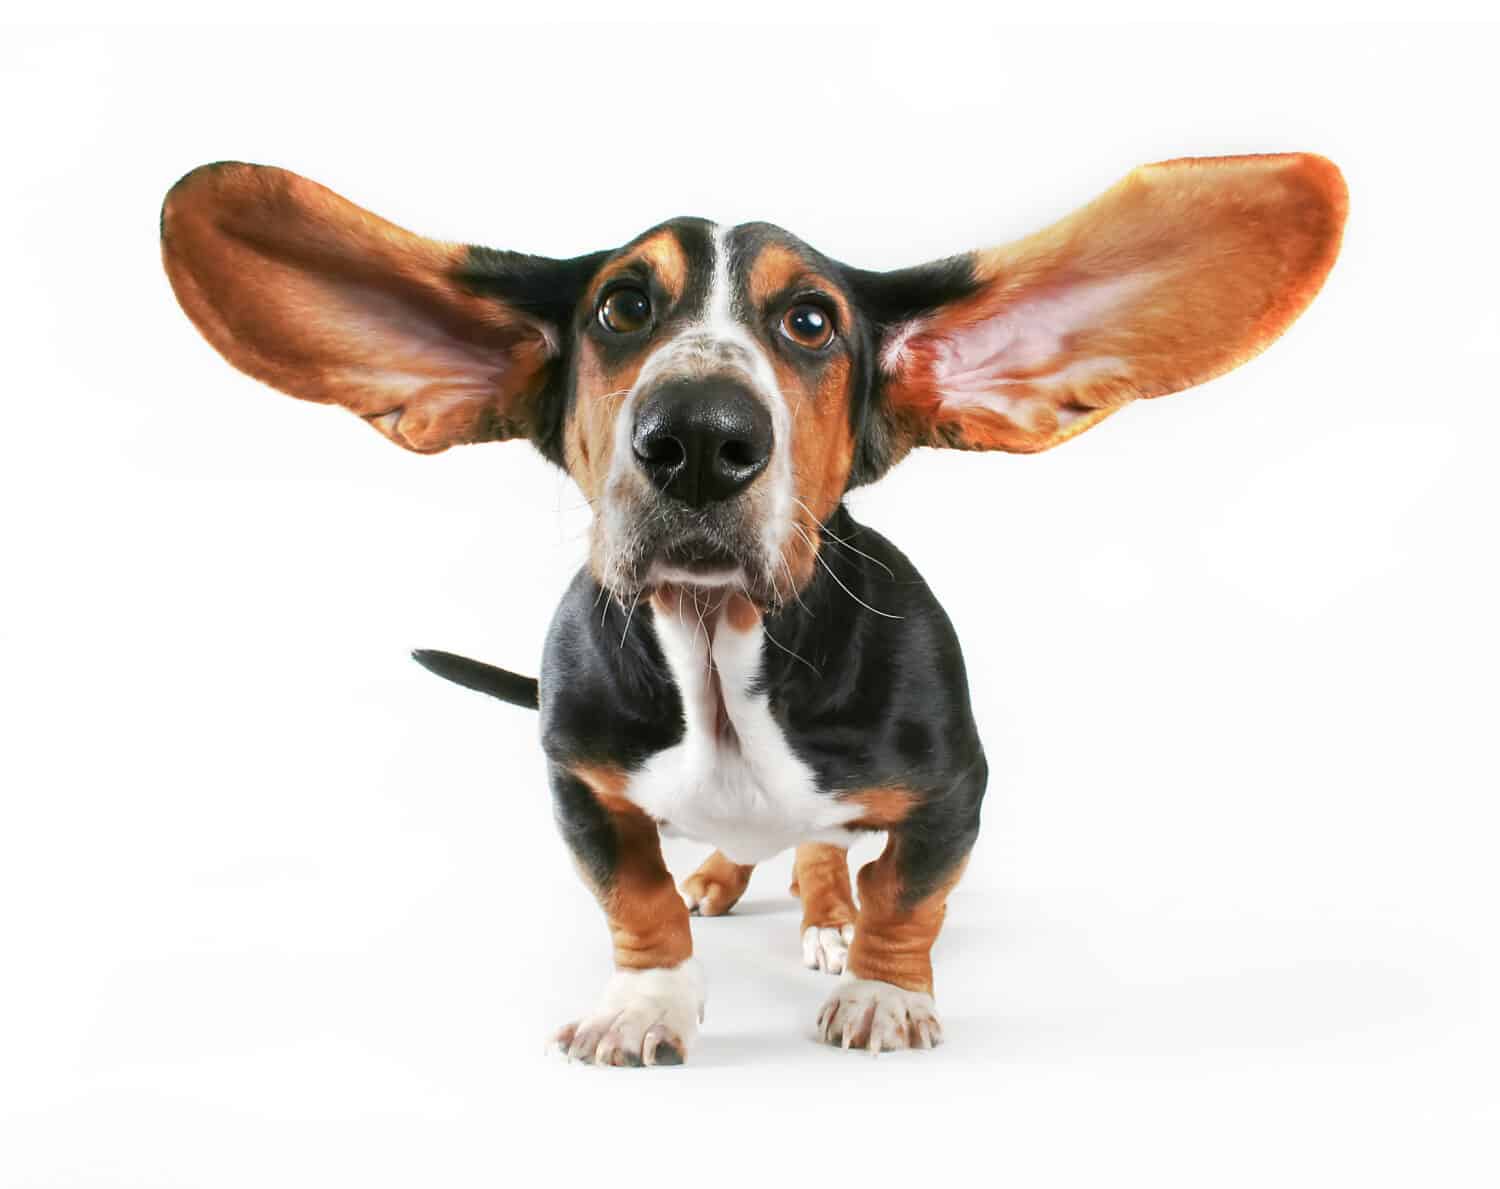 a basset hound with his ears flying away isolated on a white background